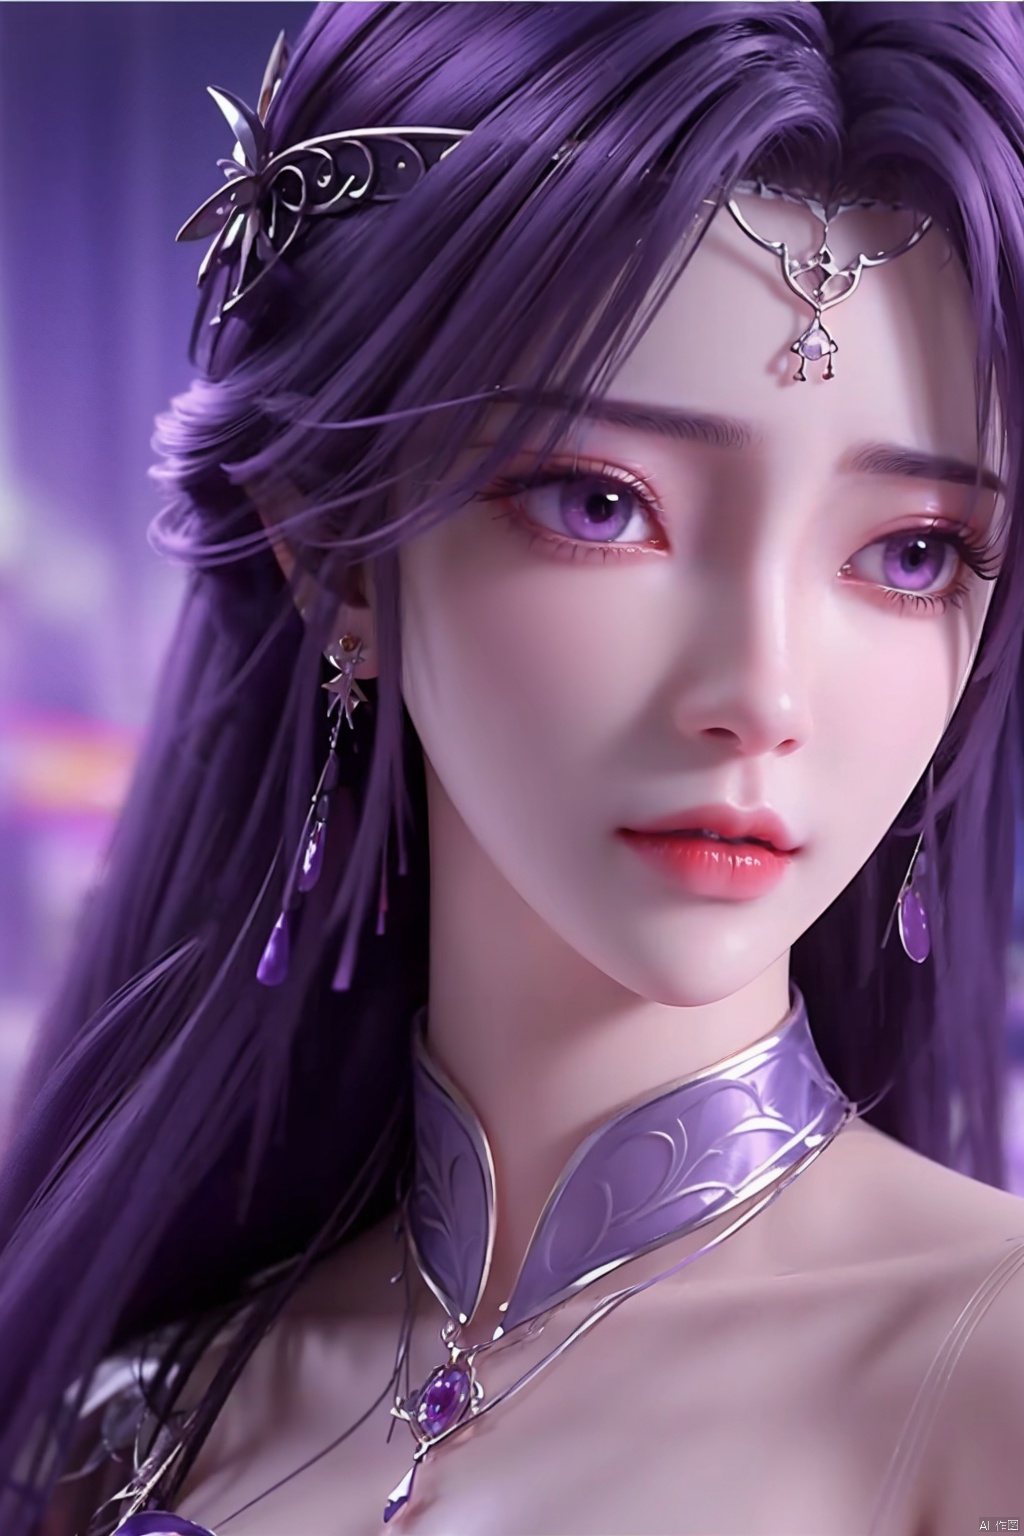  1girl
￼
solo
￼
long hair
￼
jewelry
￼
closed mouth
￼
purple eyes
￼
purple hair
￼
earrings
￼
blurry
￼
lips
￼
blurry background
￼
expressionless
￼
portrait
￼
TMS-yx
￼
